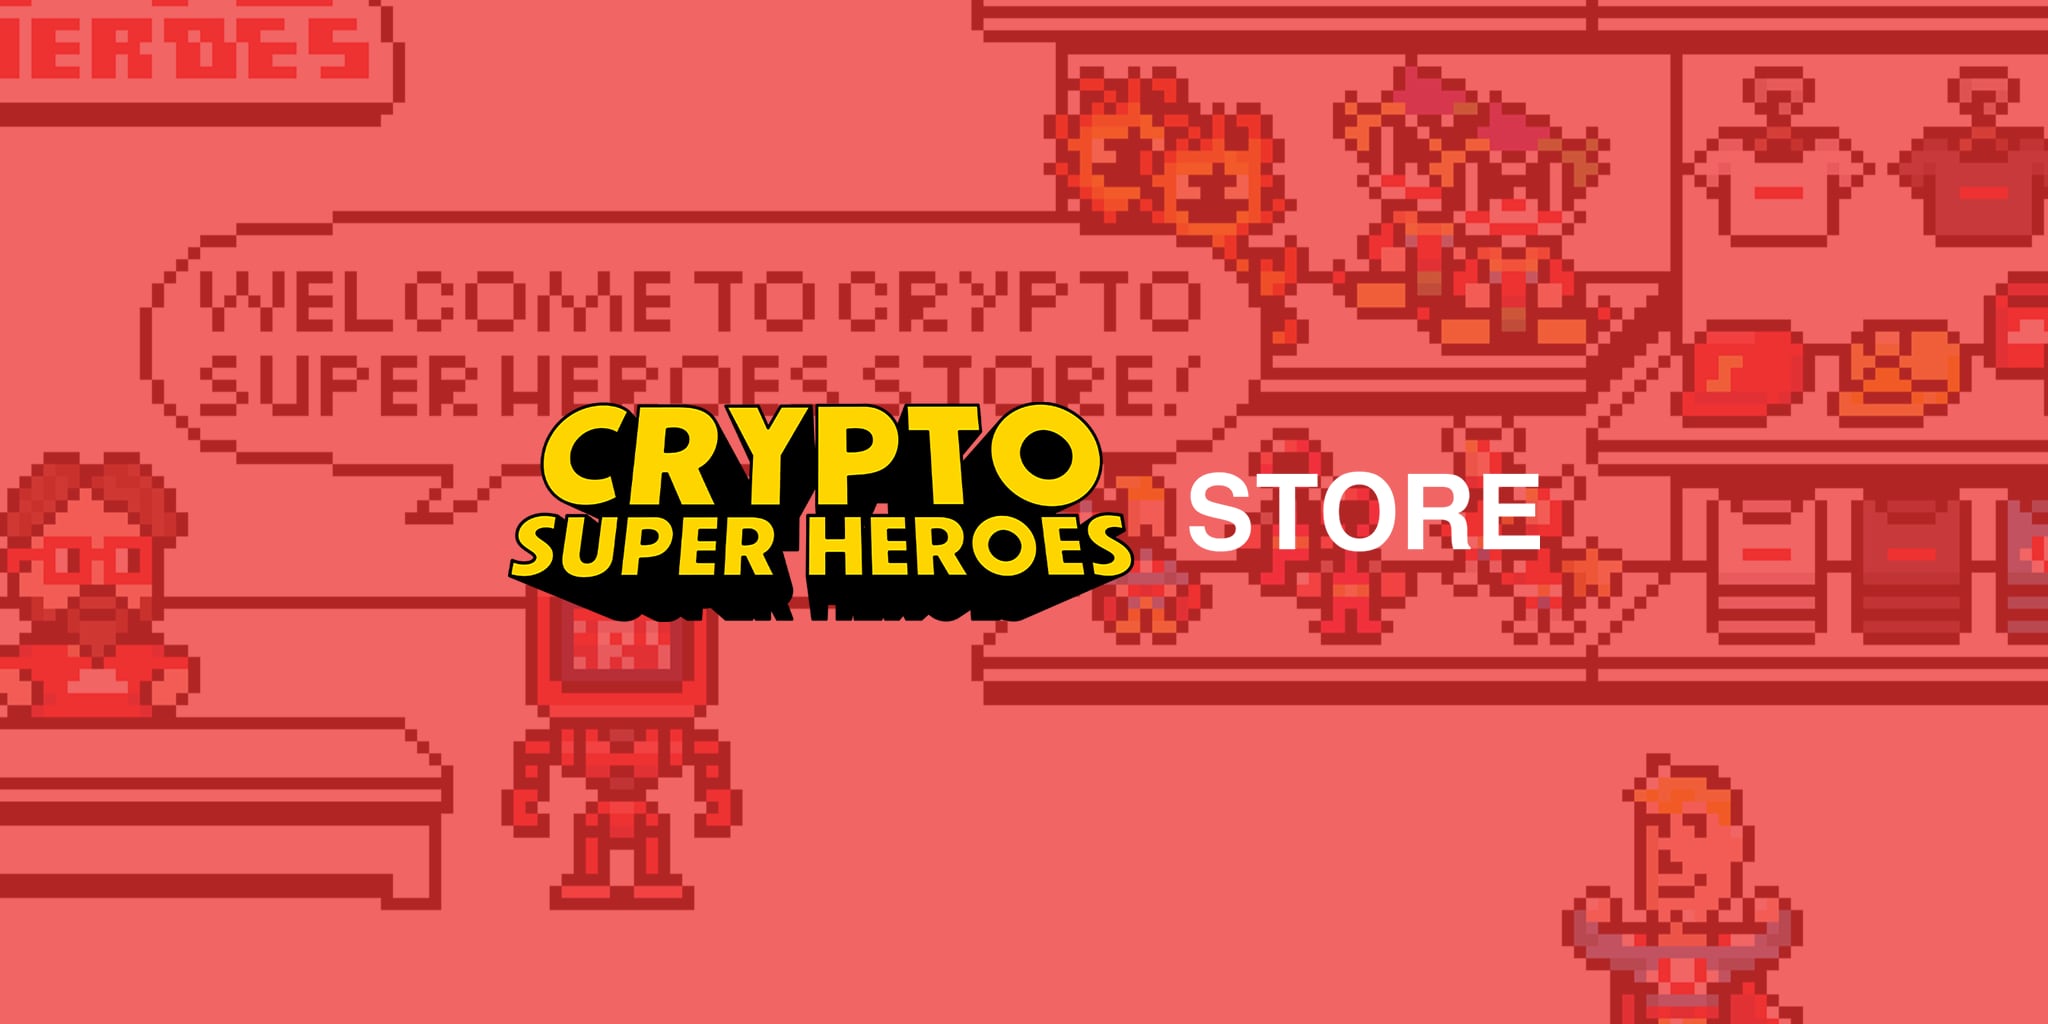 Crypto Super Heroes Store